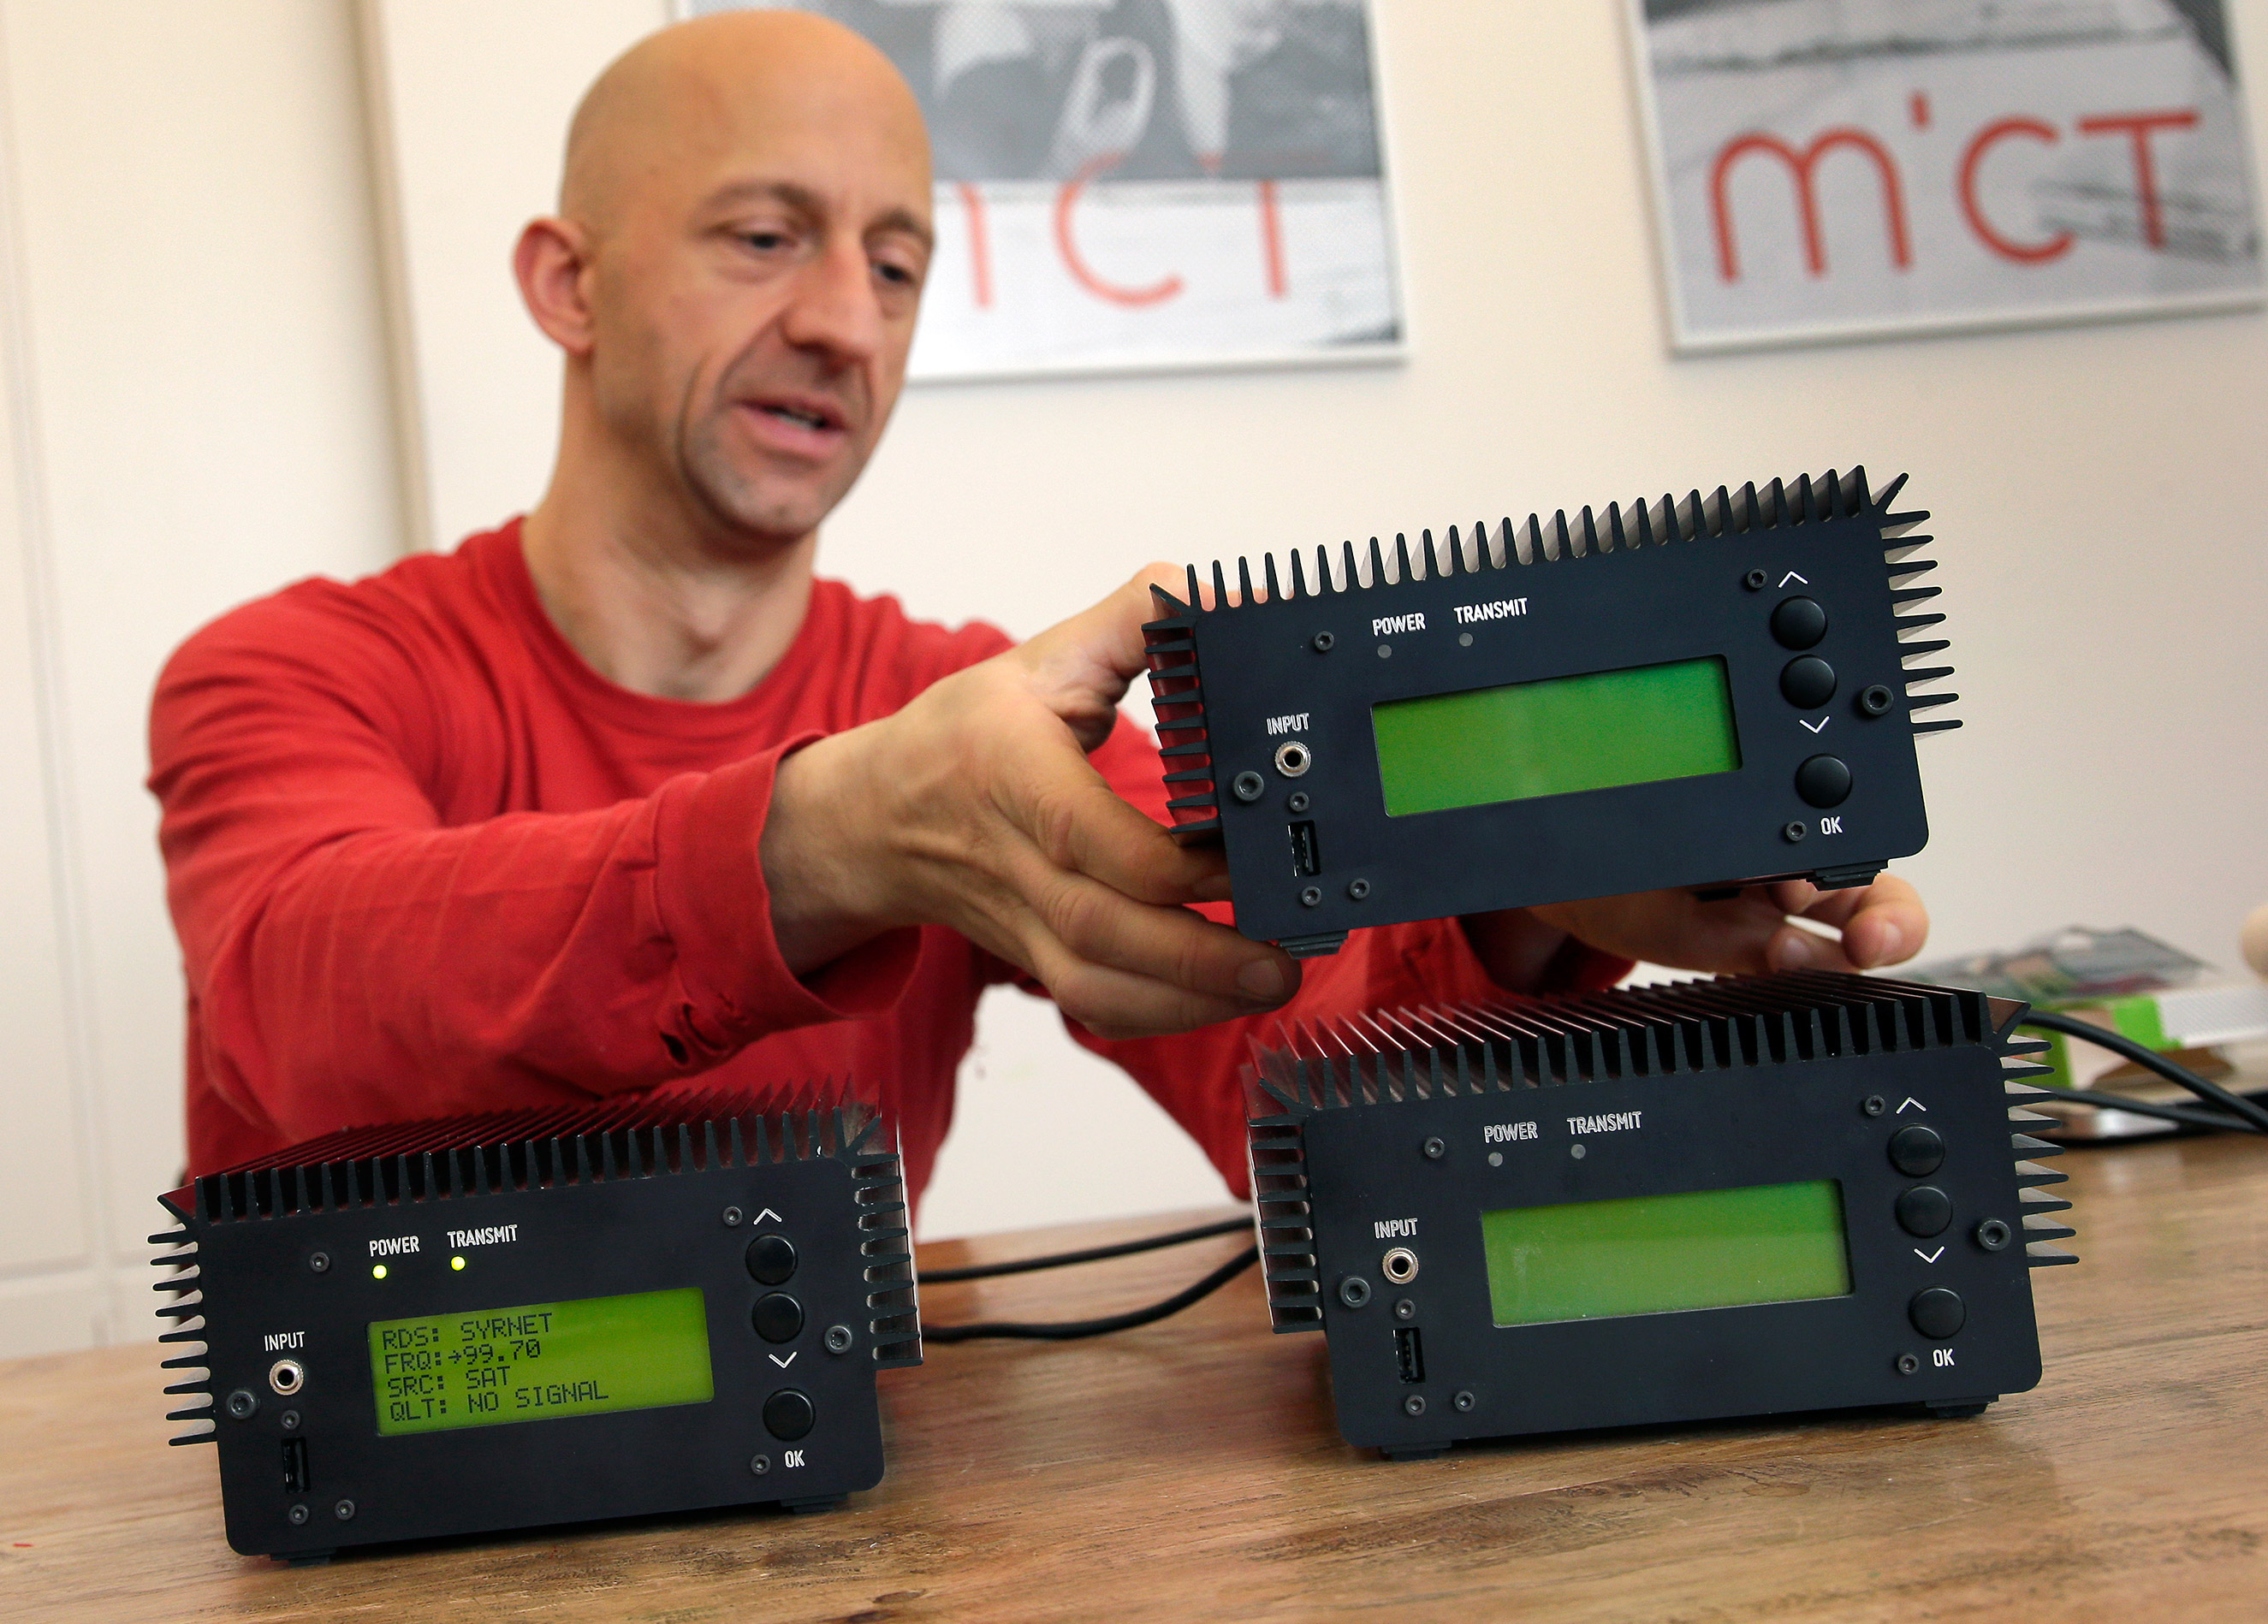 Philipp Hochleichter of the Media in Cooperation and Transition organization holds a Pocket FM Radio Transmitter in Berlin, Germany, Dec. 21, 2015. As part of the Syrian radio networking project, MICT has designed small modular FM transmitters. (Michael Sohn—AP)